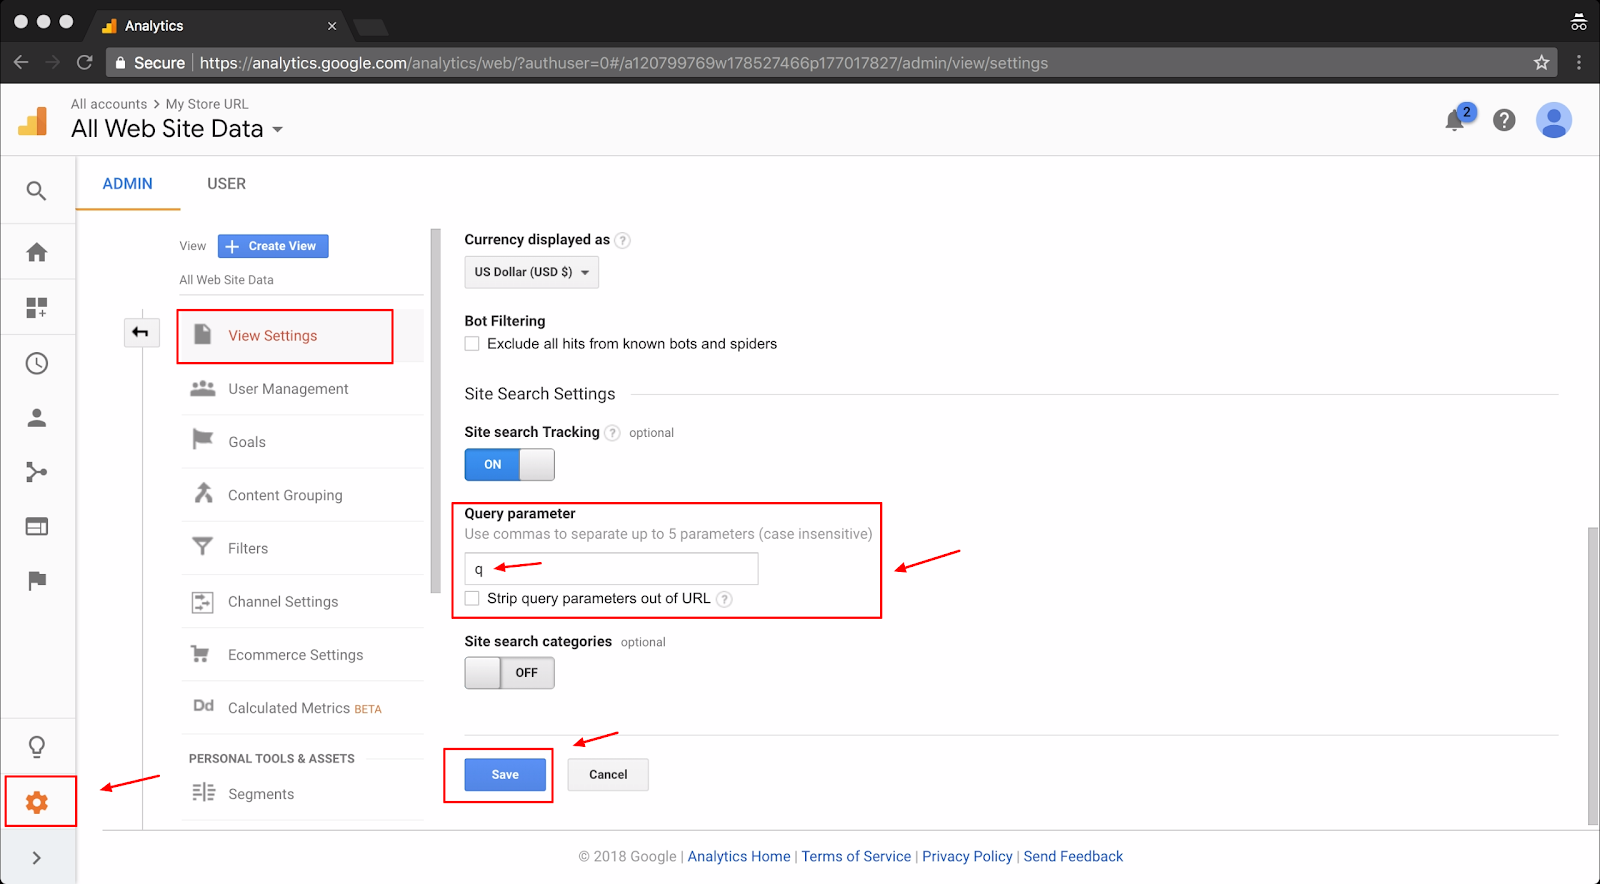 Screenshot showing a settings page on the Google Analytics dashboard